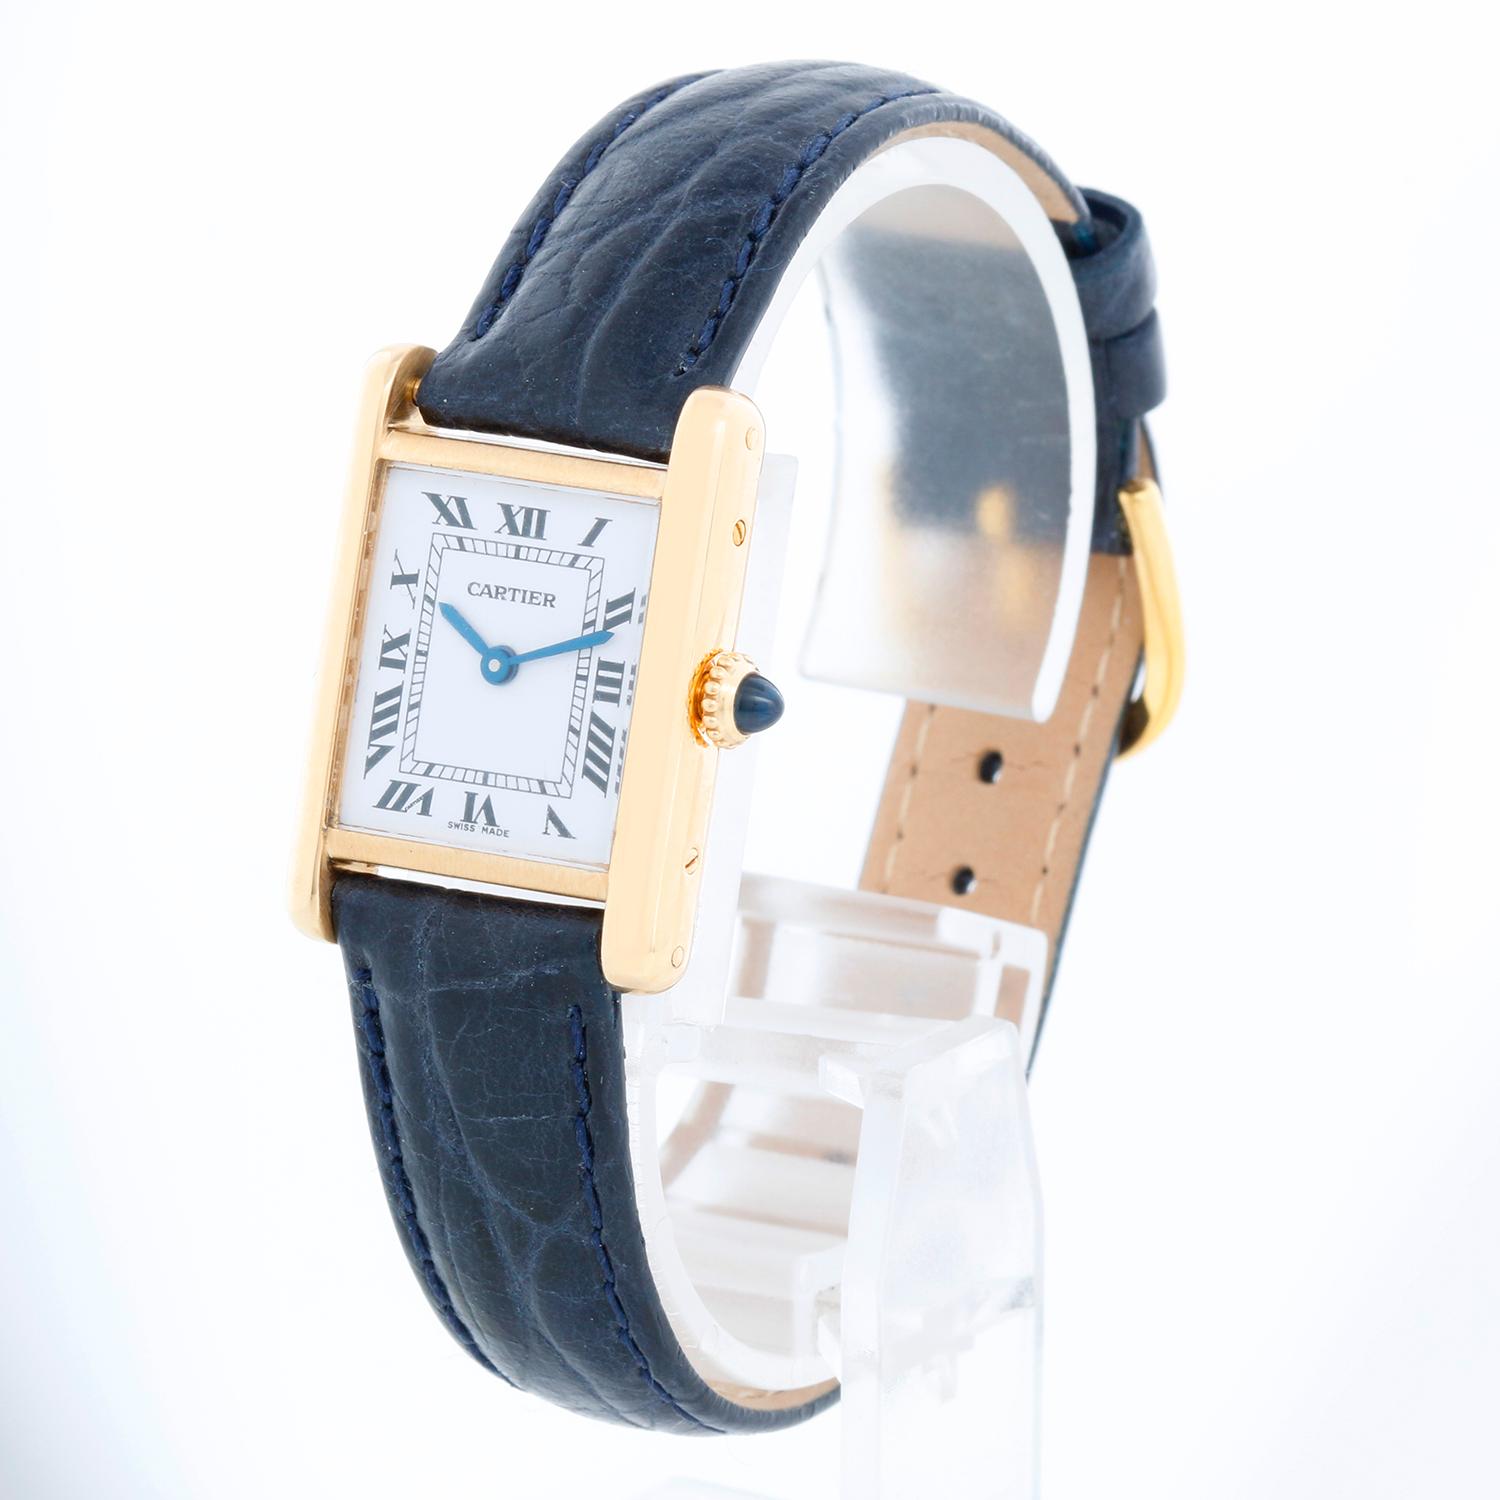 Cartier Tank 18K Yellow Ladies Watch  - Manual winding . 18k yellow gold case with stainless steel back (20mm x 28mm). White dial with black Roman numerals. Blue alligator strap with tang buckle . Pre-owned with custom box.